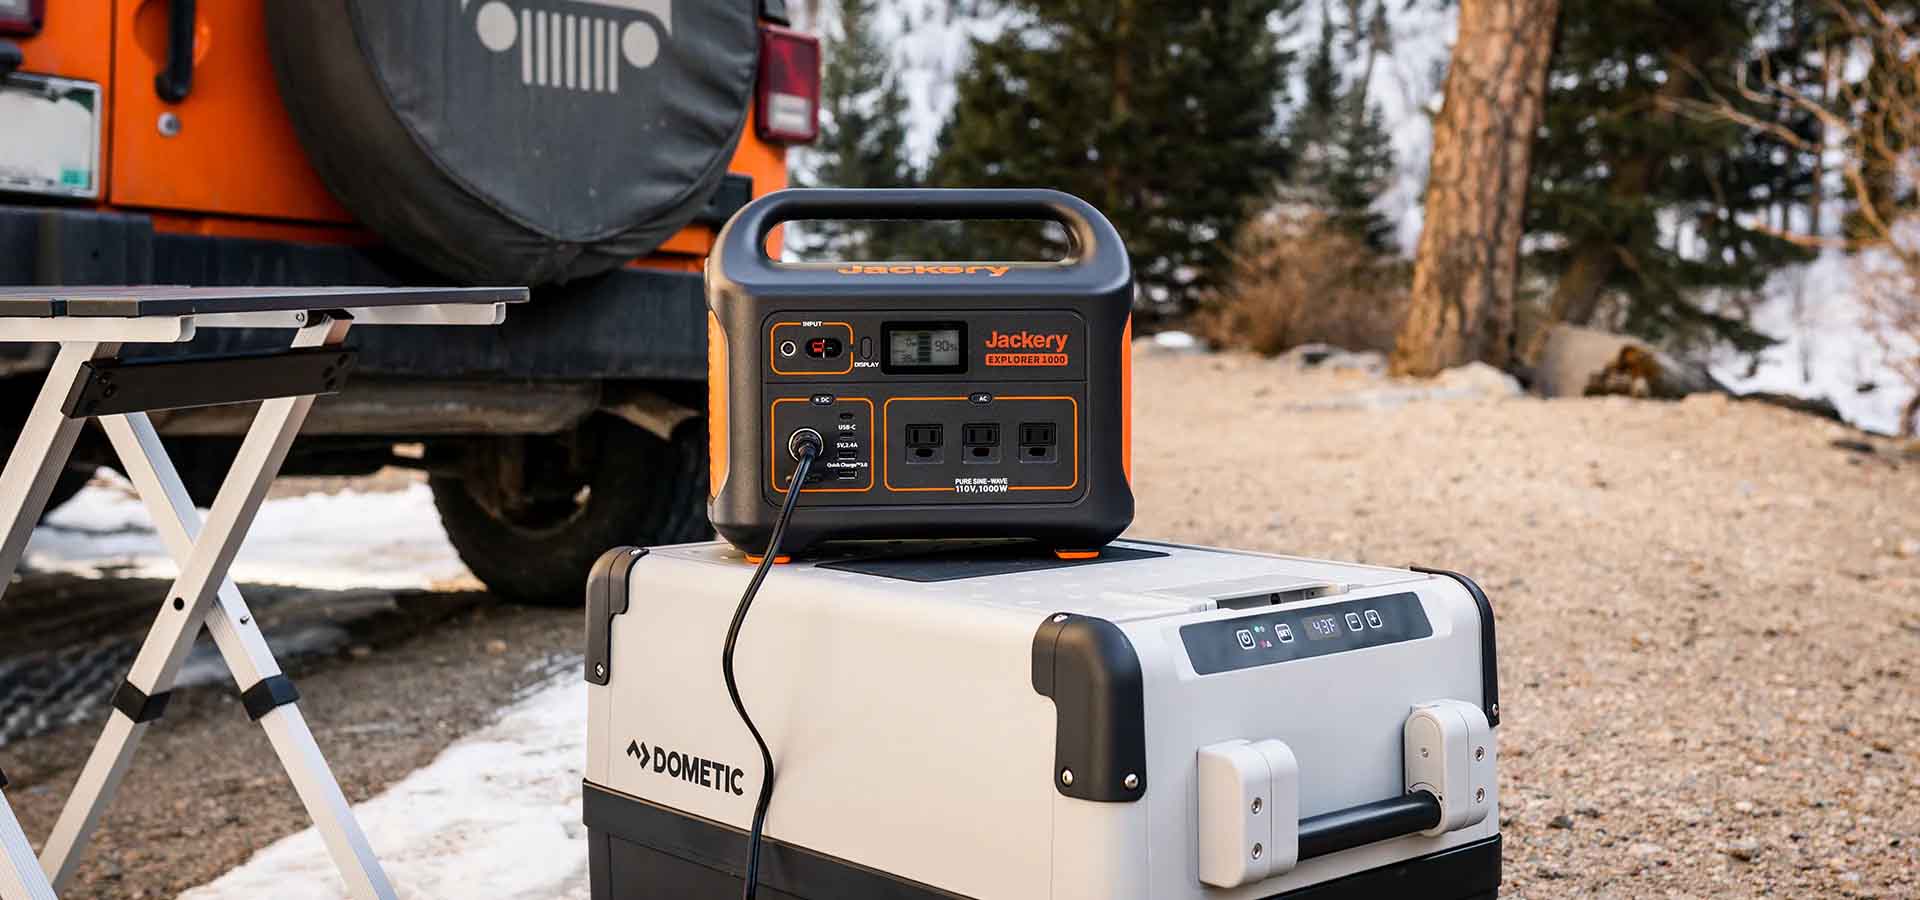 Jackery Explorer 880 Pro Powering A Dometic At A Campsite